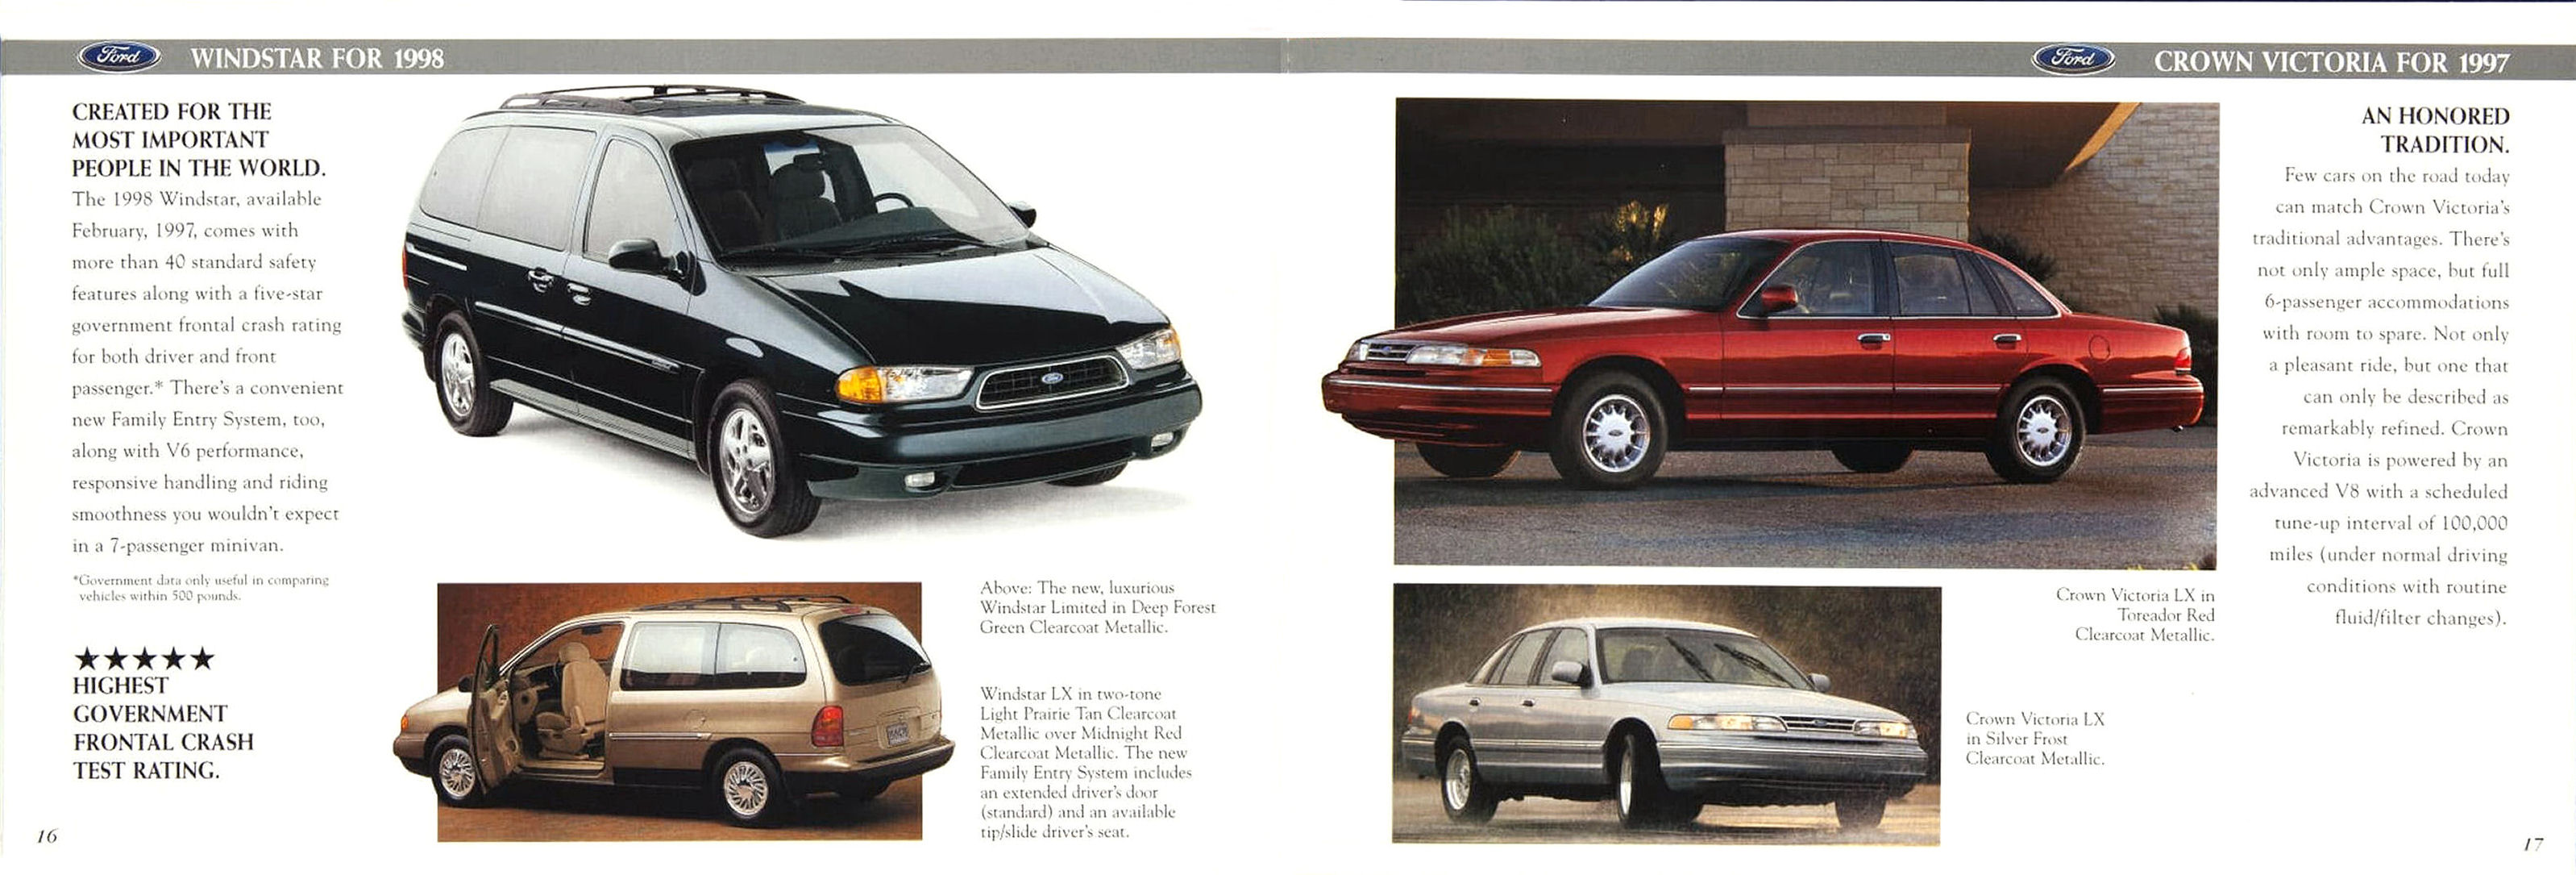 1997_Ford_Cars_and_Trucks_Rev-16-17